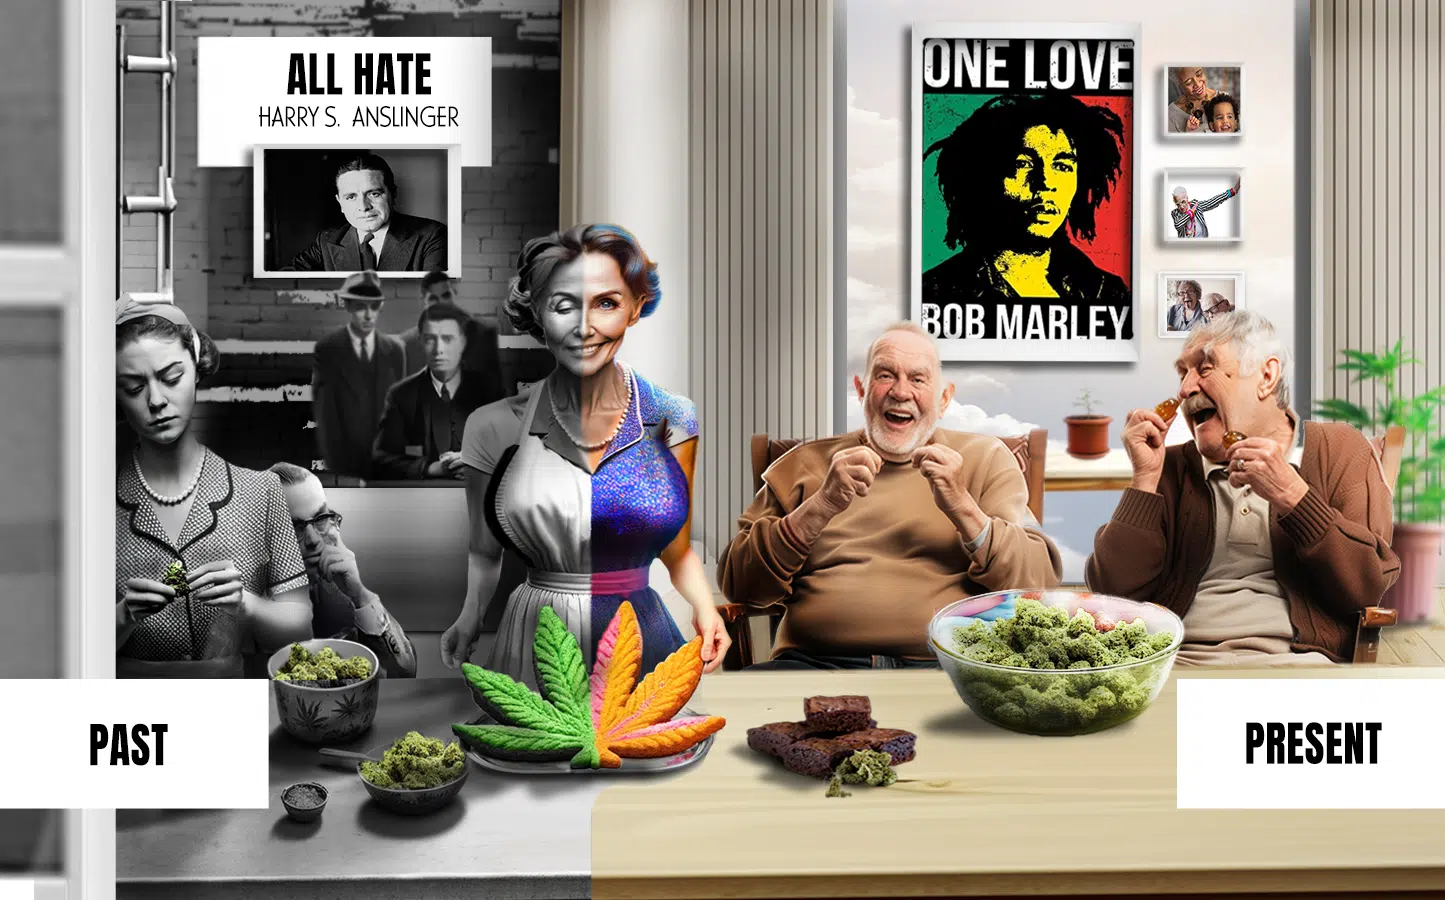 Opinions of cannabis edibles have changed over generations. This image shows harry s. Anslinger on the left side in black and white with the words 'all hate' next to his name. On the right side, you see bob marley and lots of colorful good vibrations with the words 'one love' by his name. From past to present, the outlook on cannabis has evolved and now, its time to see how safe thc edibles and gummies are for senior citizens.